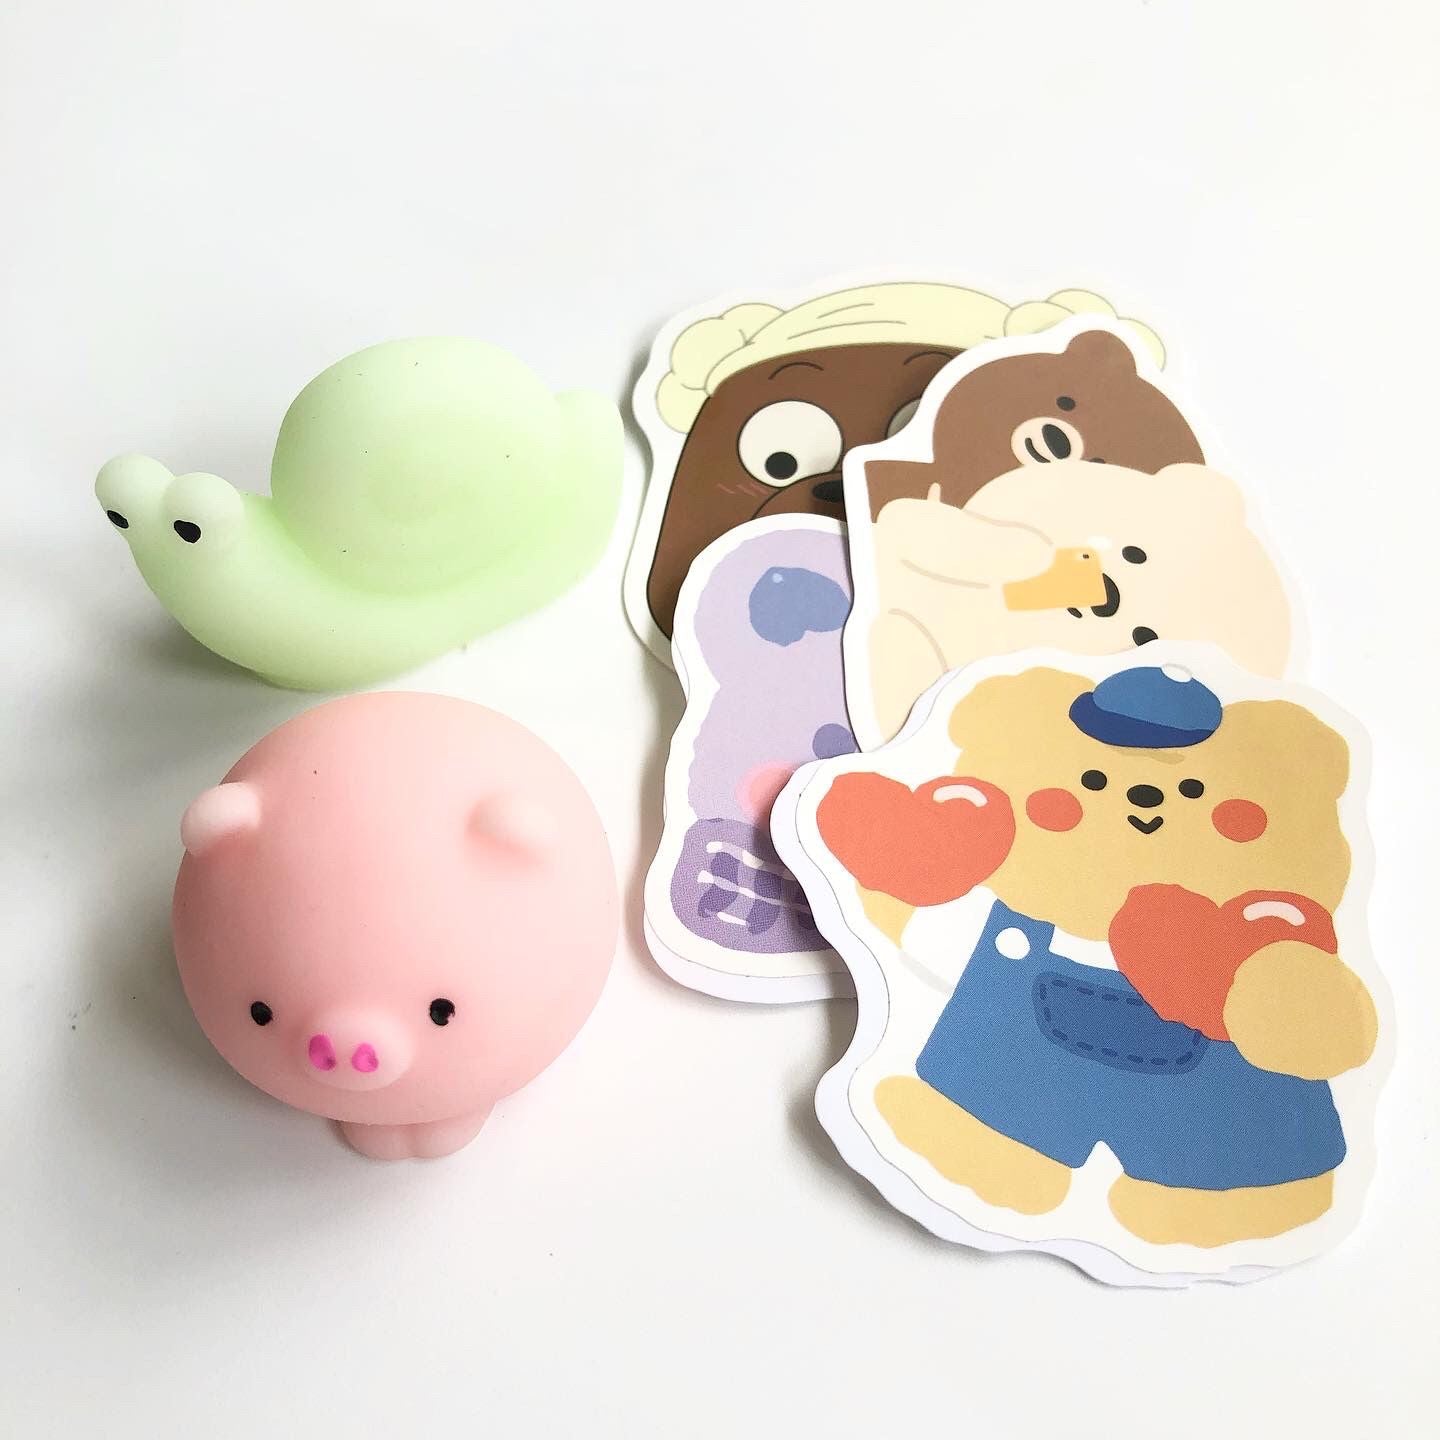 Squishy Party Packs!